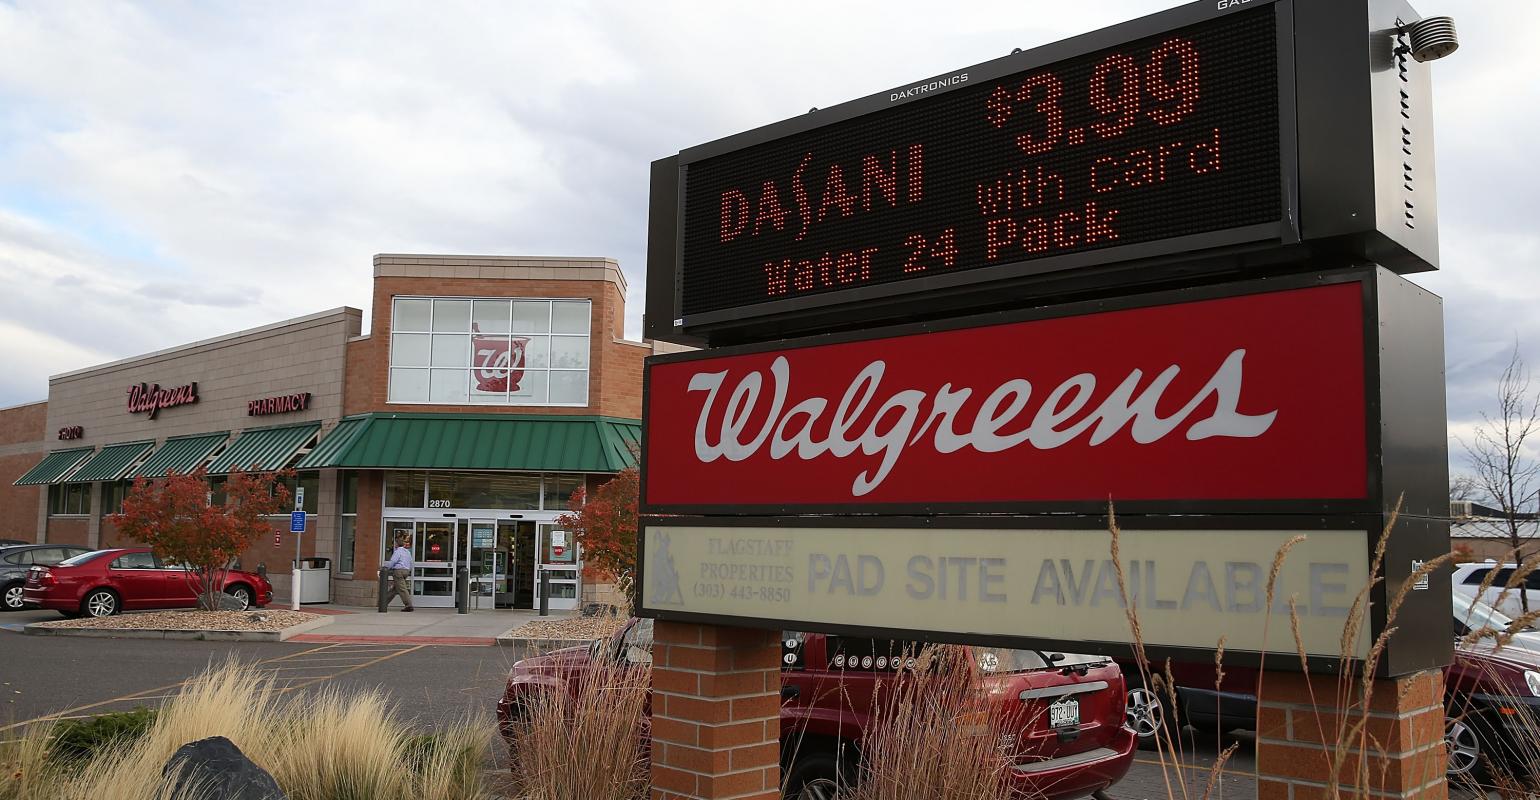 Savvy Deals: Check bargains from Walgreen's, Big Lots and more